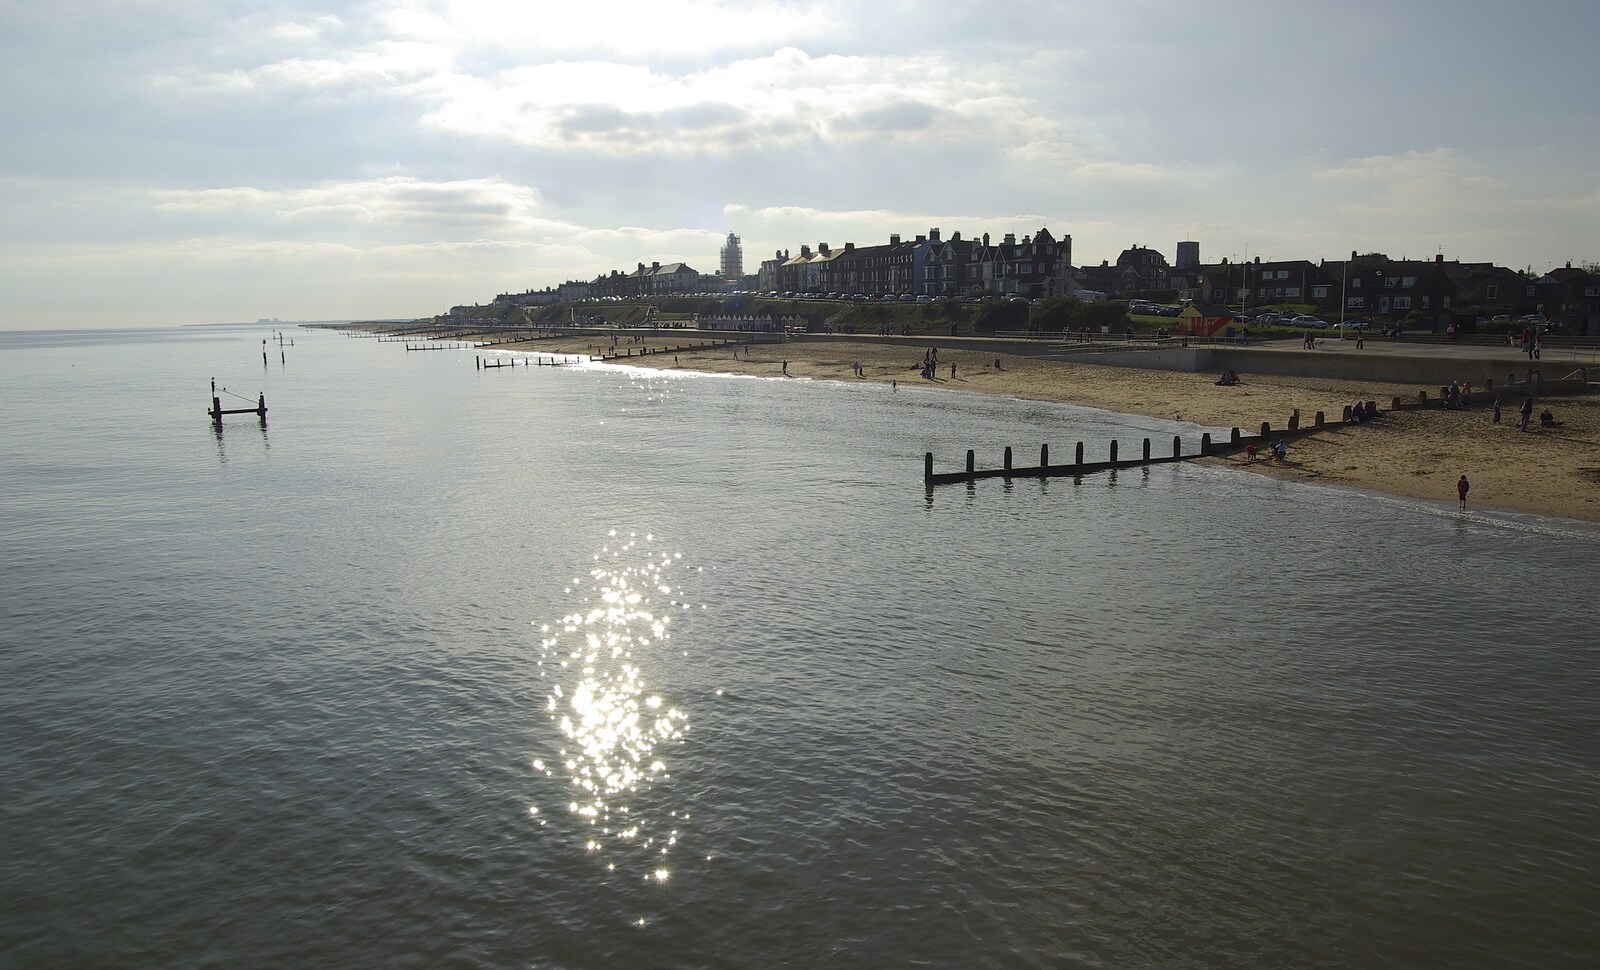 Coldham's Traffic Light Destruction, and a Trip to the Pier, Cambridge and Southwold - 21st October 2007: The town of Southwold, as seen from the pier